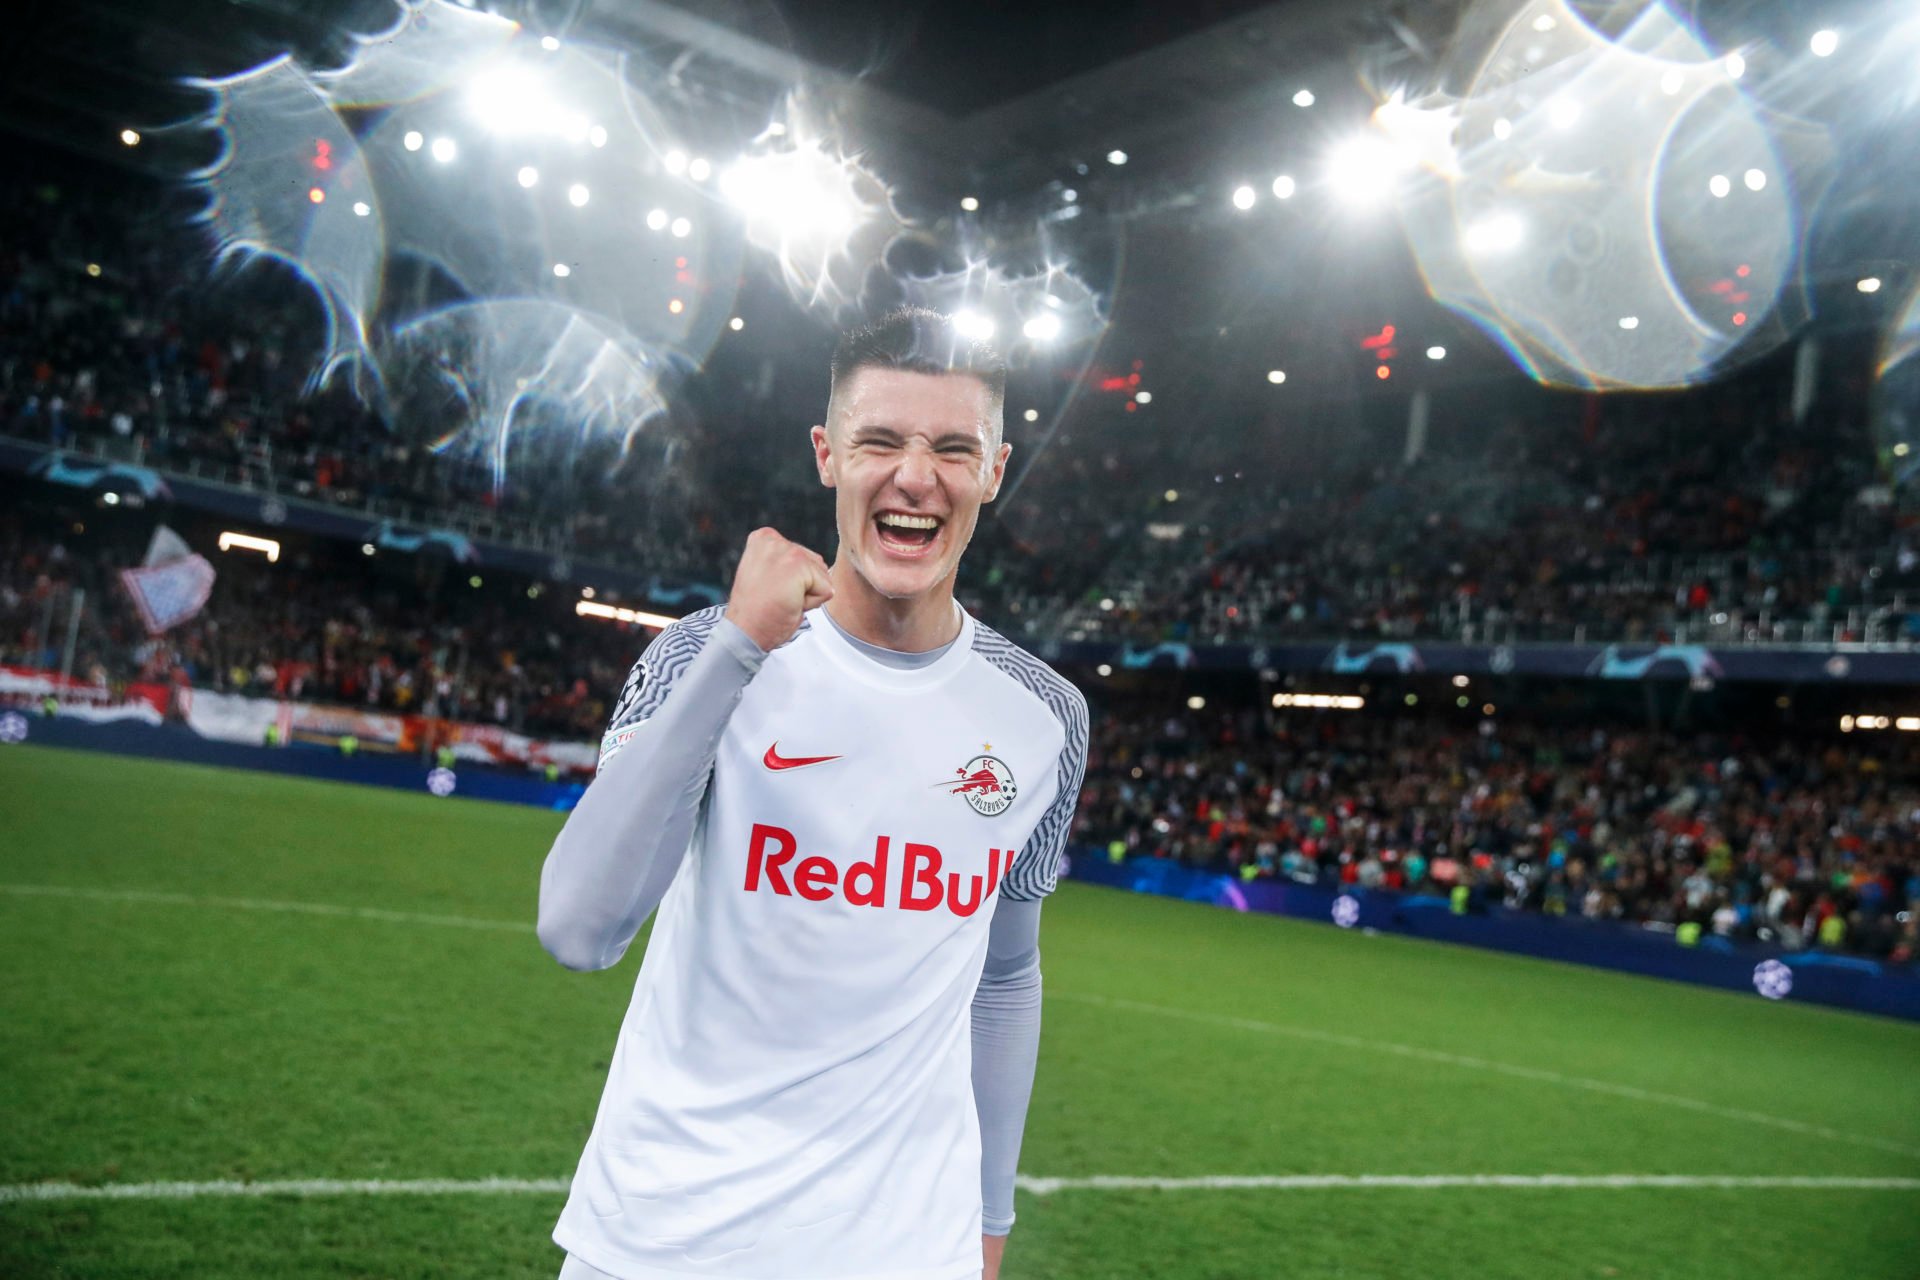  Benjamin Sesko celebrates a goal while playing soccer for RB Leipzig.